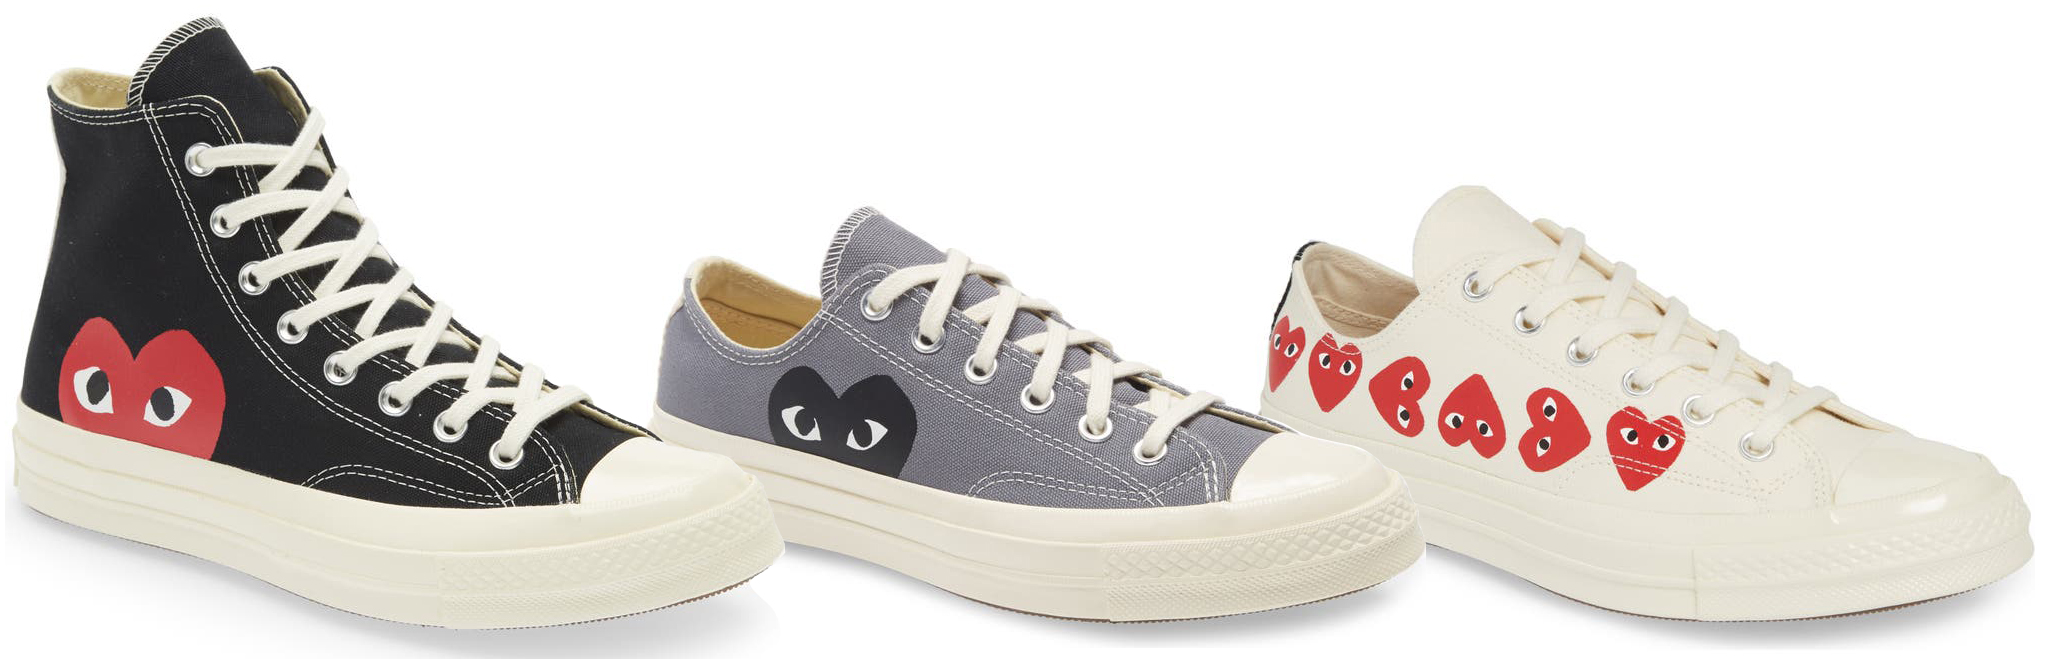 Make your couple shoes sweeter by wearing your heart on your feet with the Comme Des Garcons x Converse Chuck Taylors